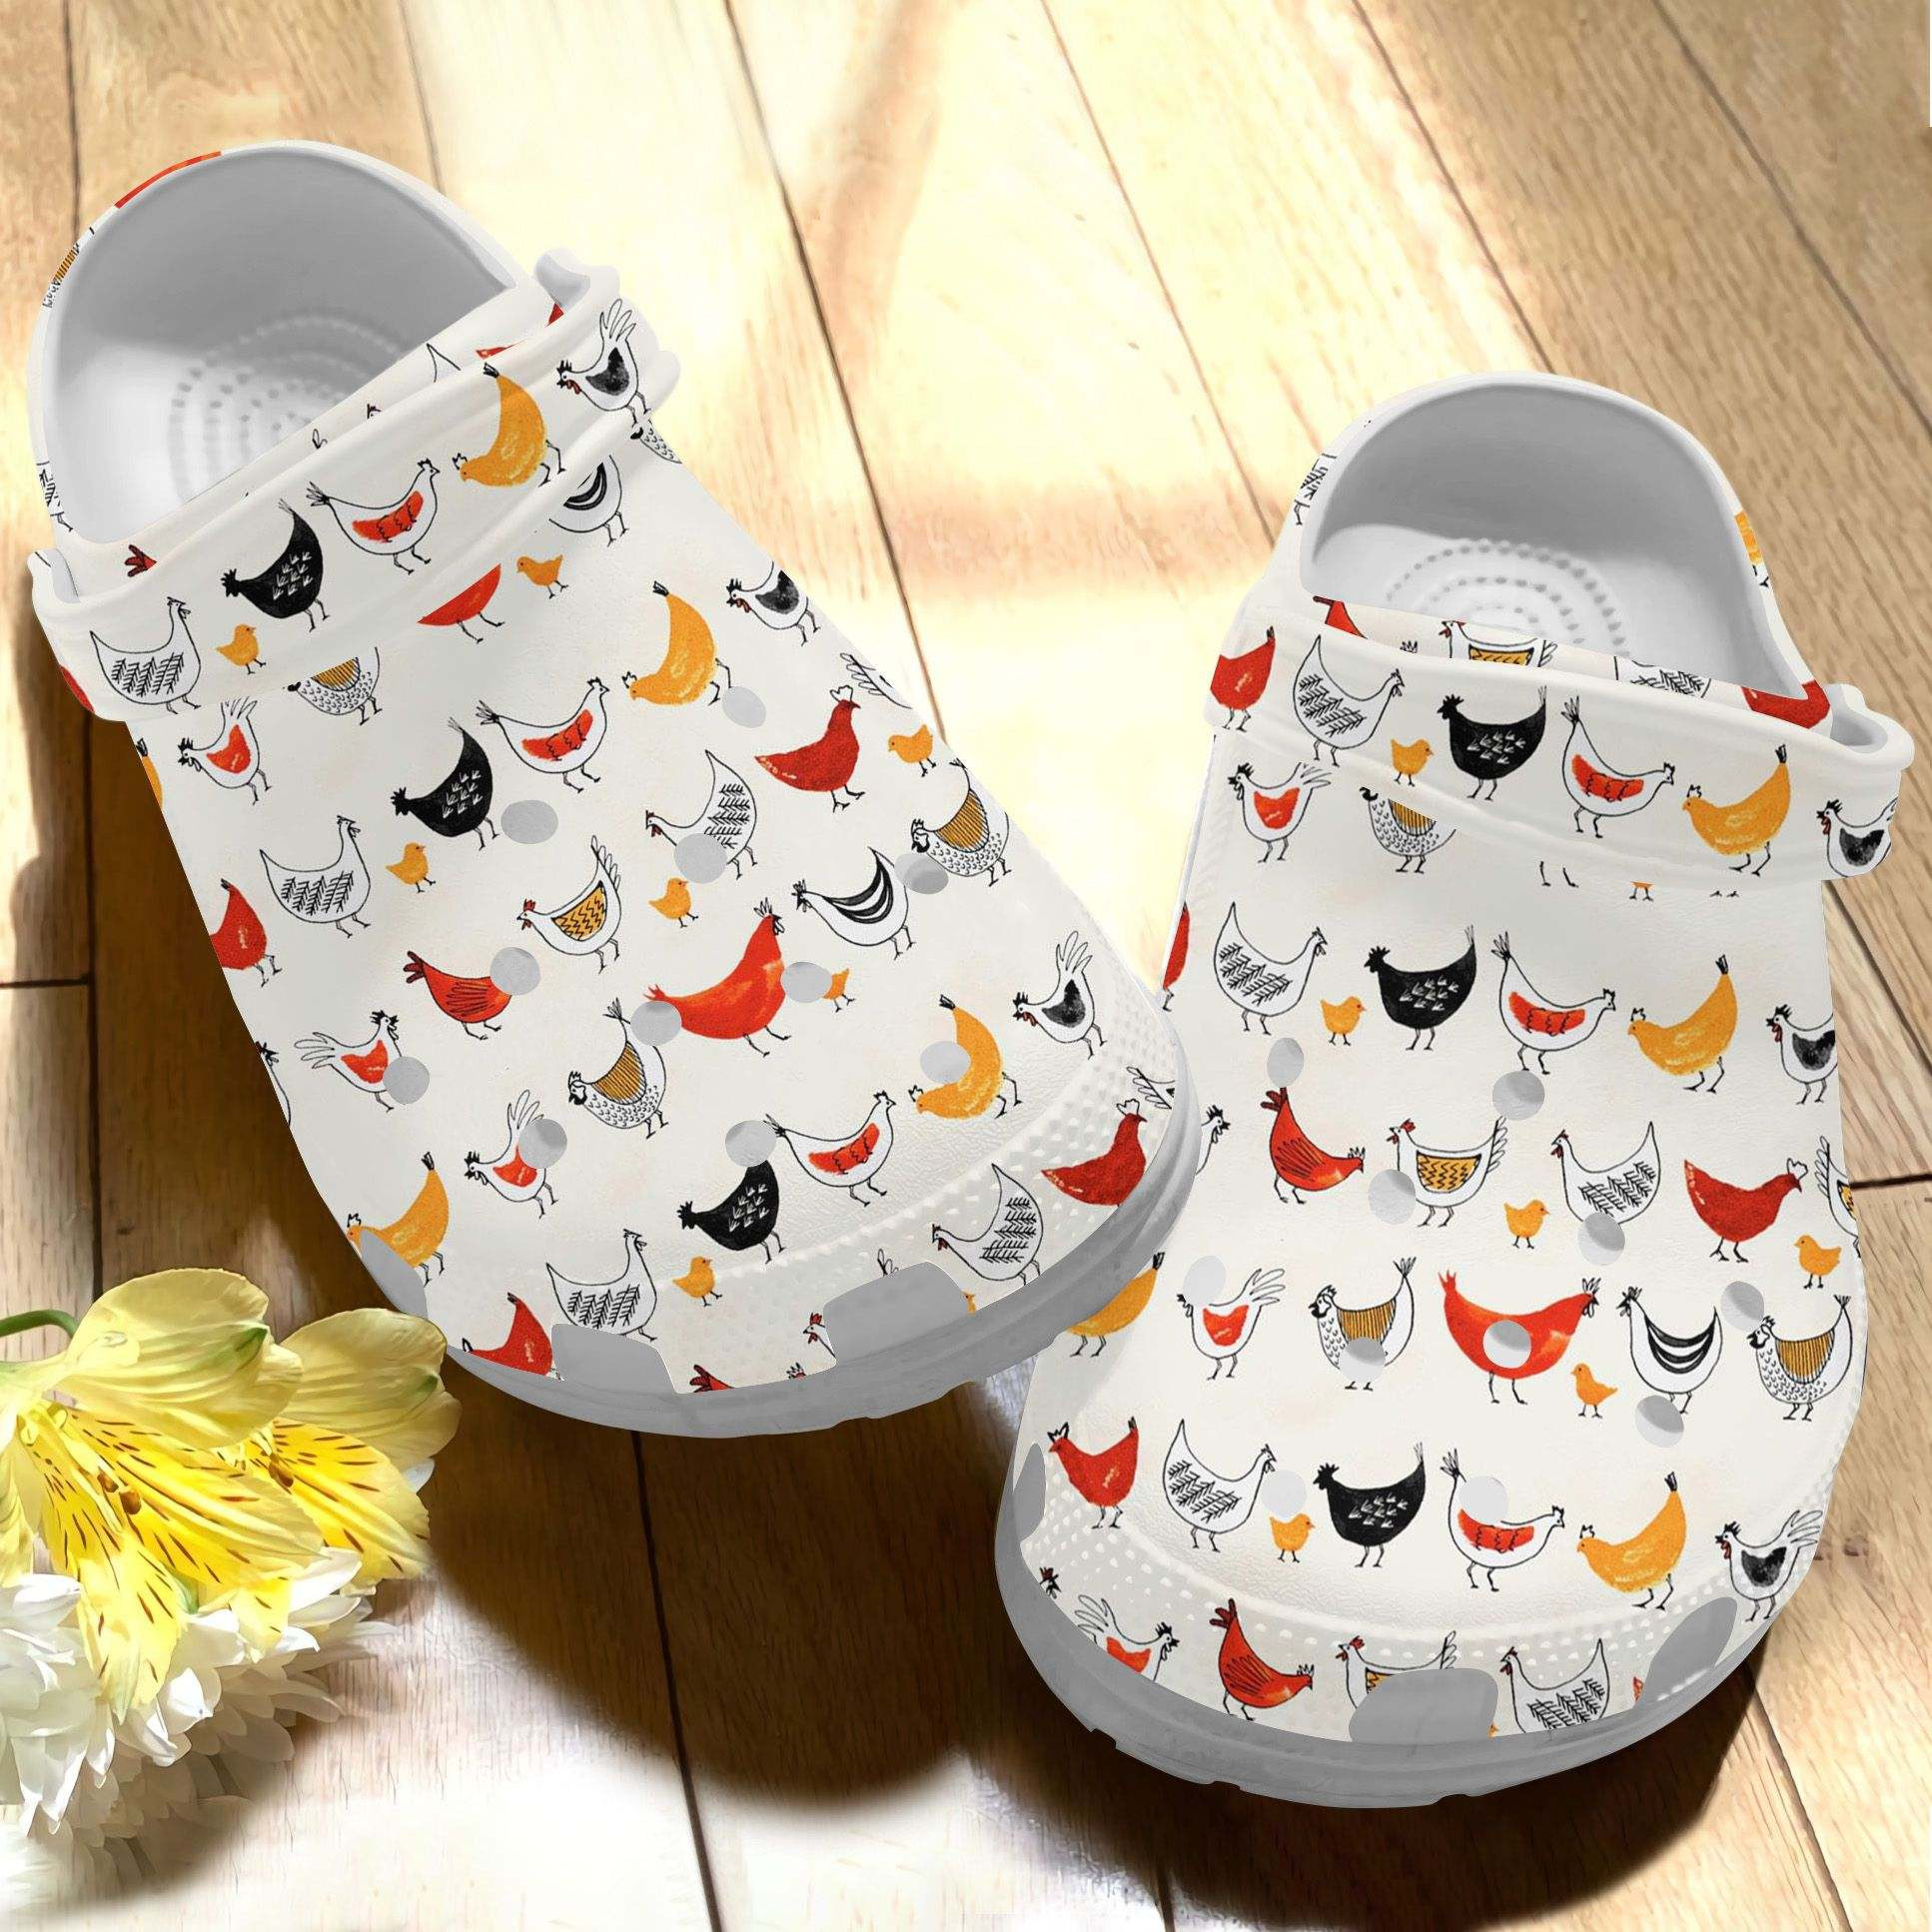 Chibi Chicken Croc Shoes For Birthday - Chicken Cute Dog Shoes Crocbland Clog Gifts For Niece Daughter Sister